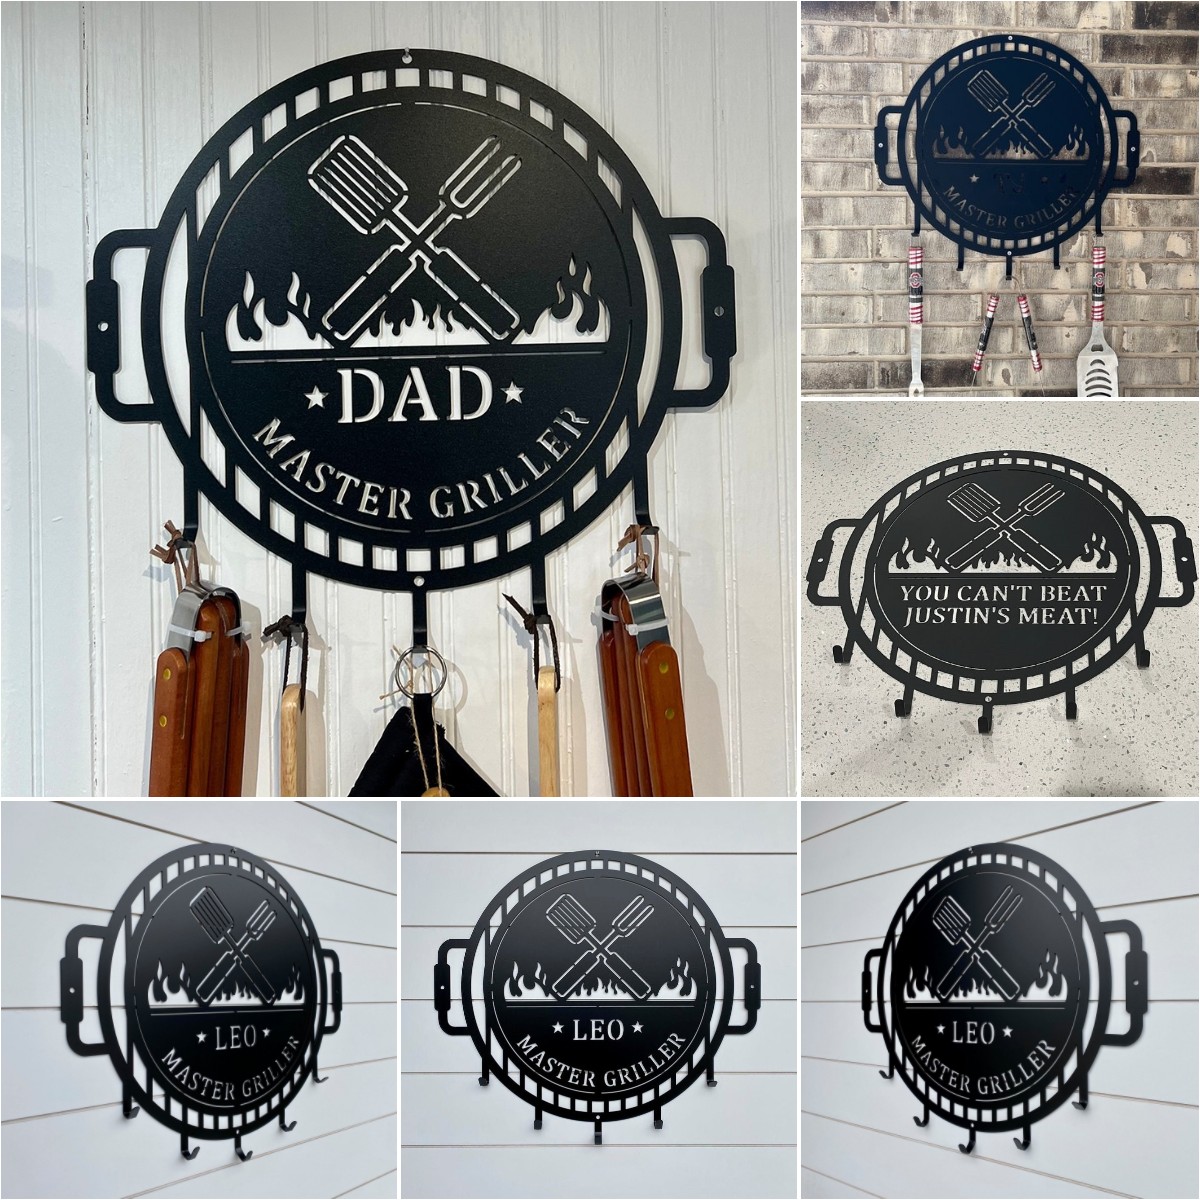 Grill Name Sign with Metal Hooks for hanging Grilling Utensils